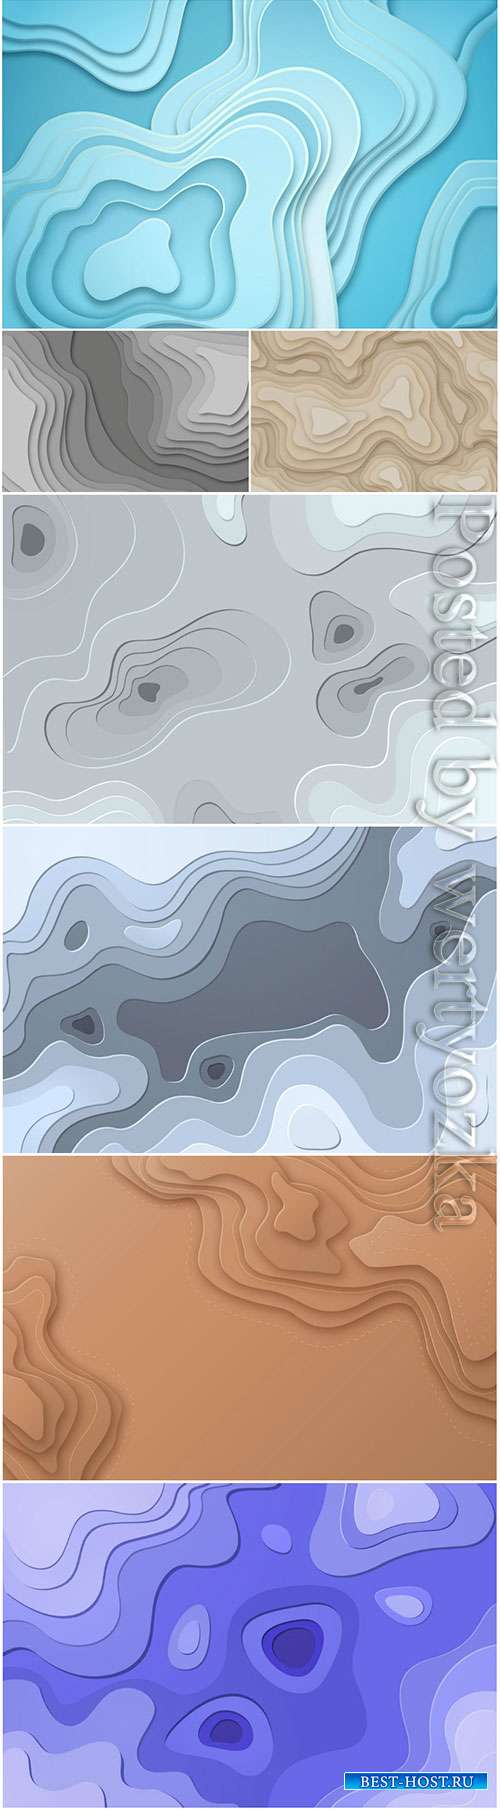 Topographic map wallpaper vector background concept